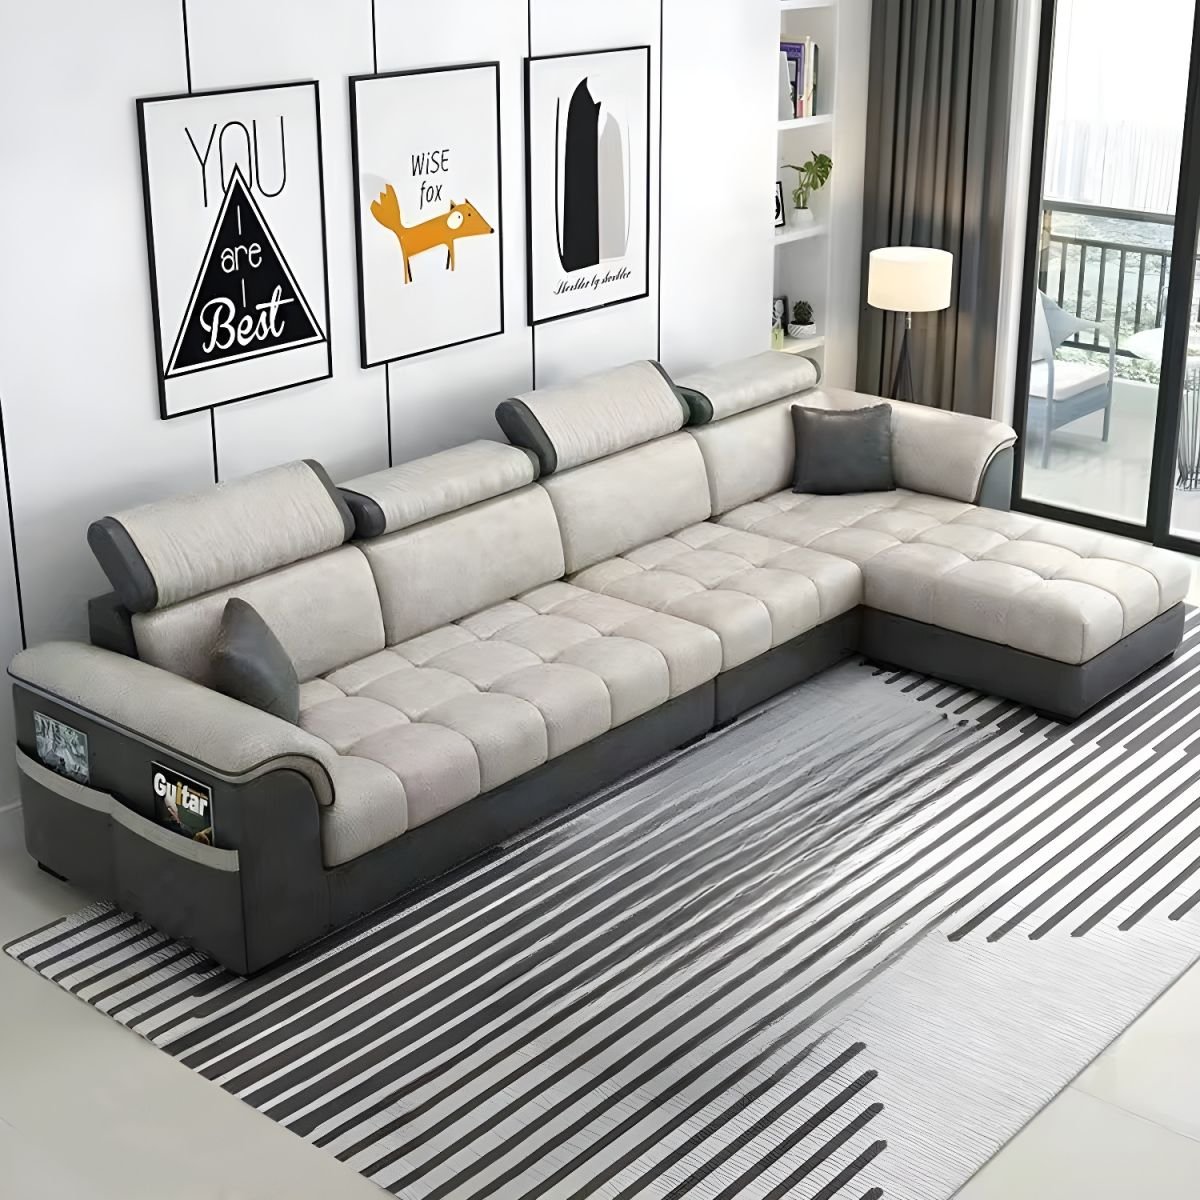 Contemporary L-Shaped Sectional Sofa with Adjustable Pillows and Storage - Tech Cloth Dark Gray/ Light Gray